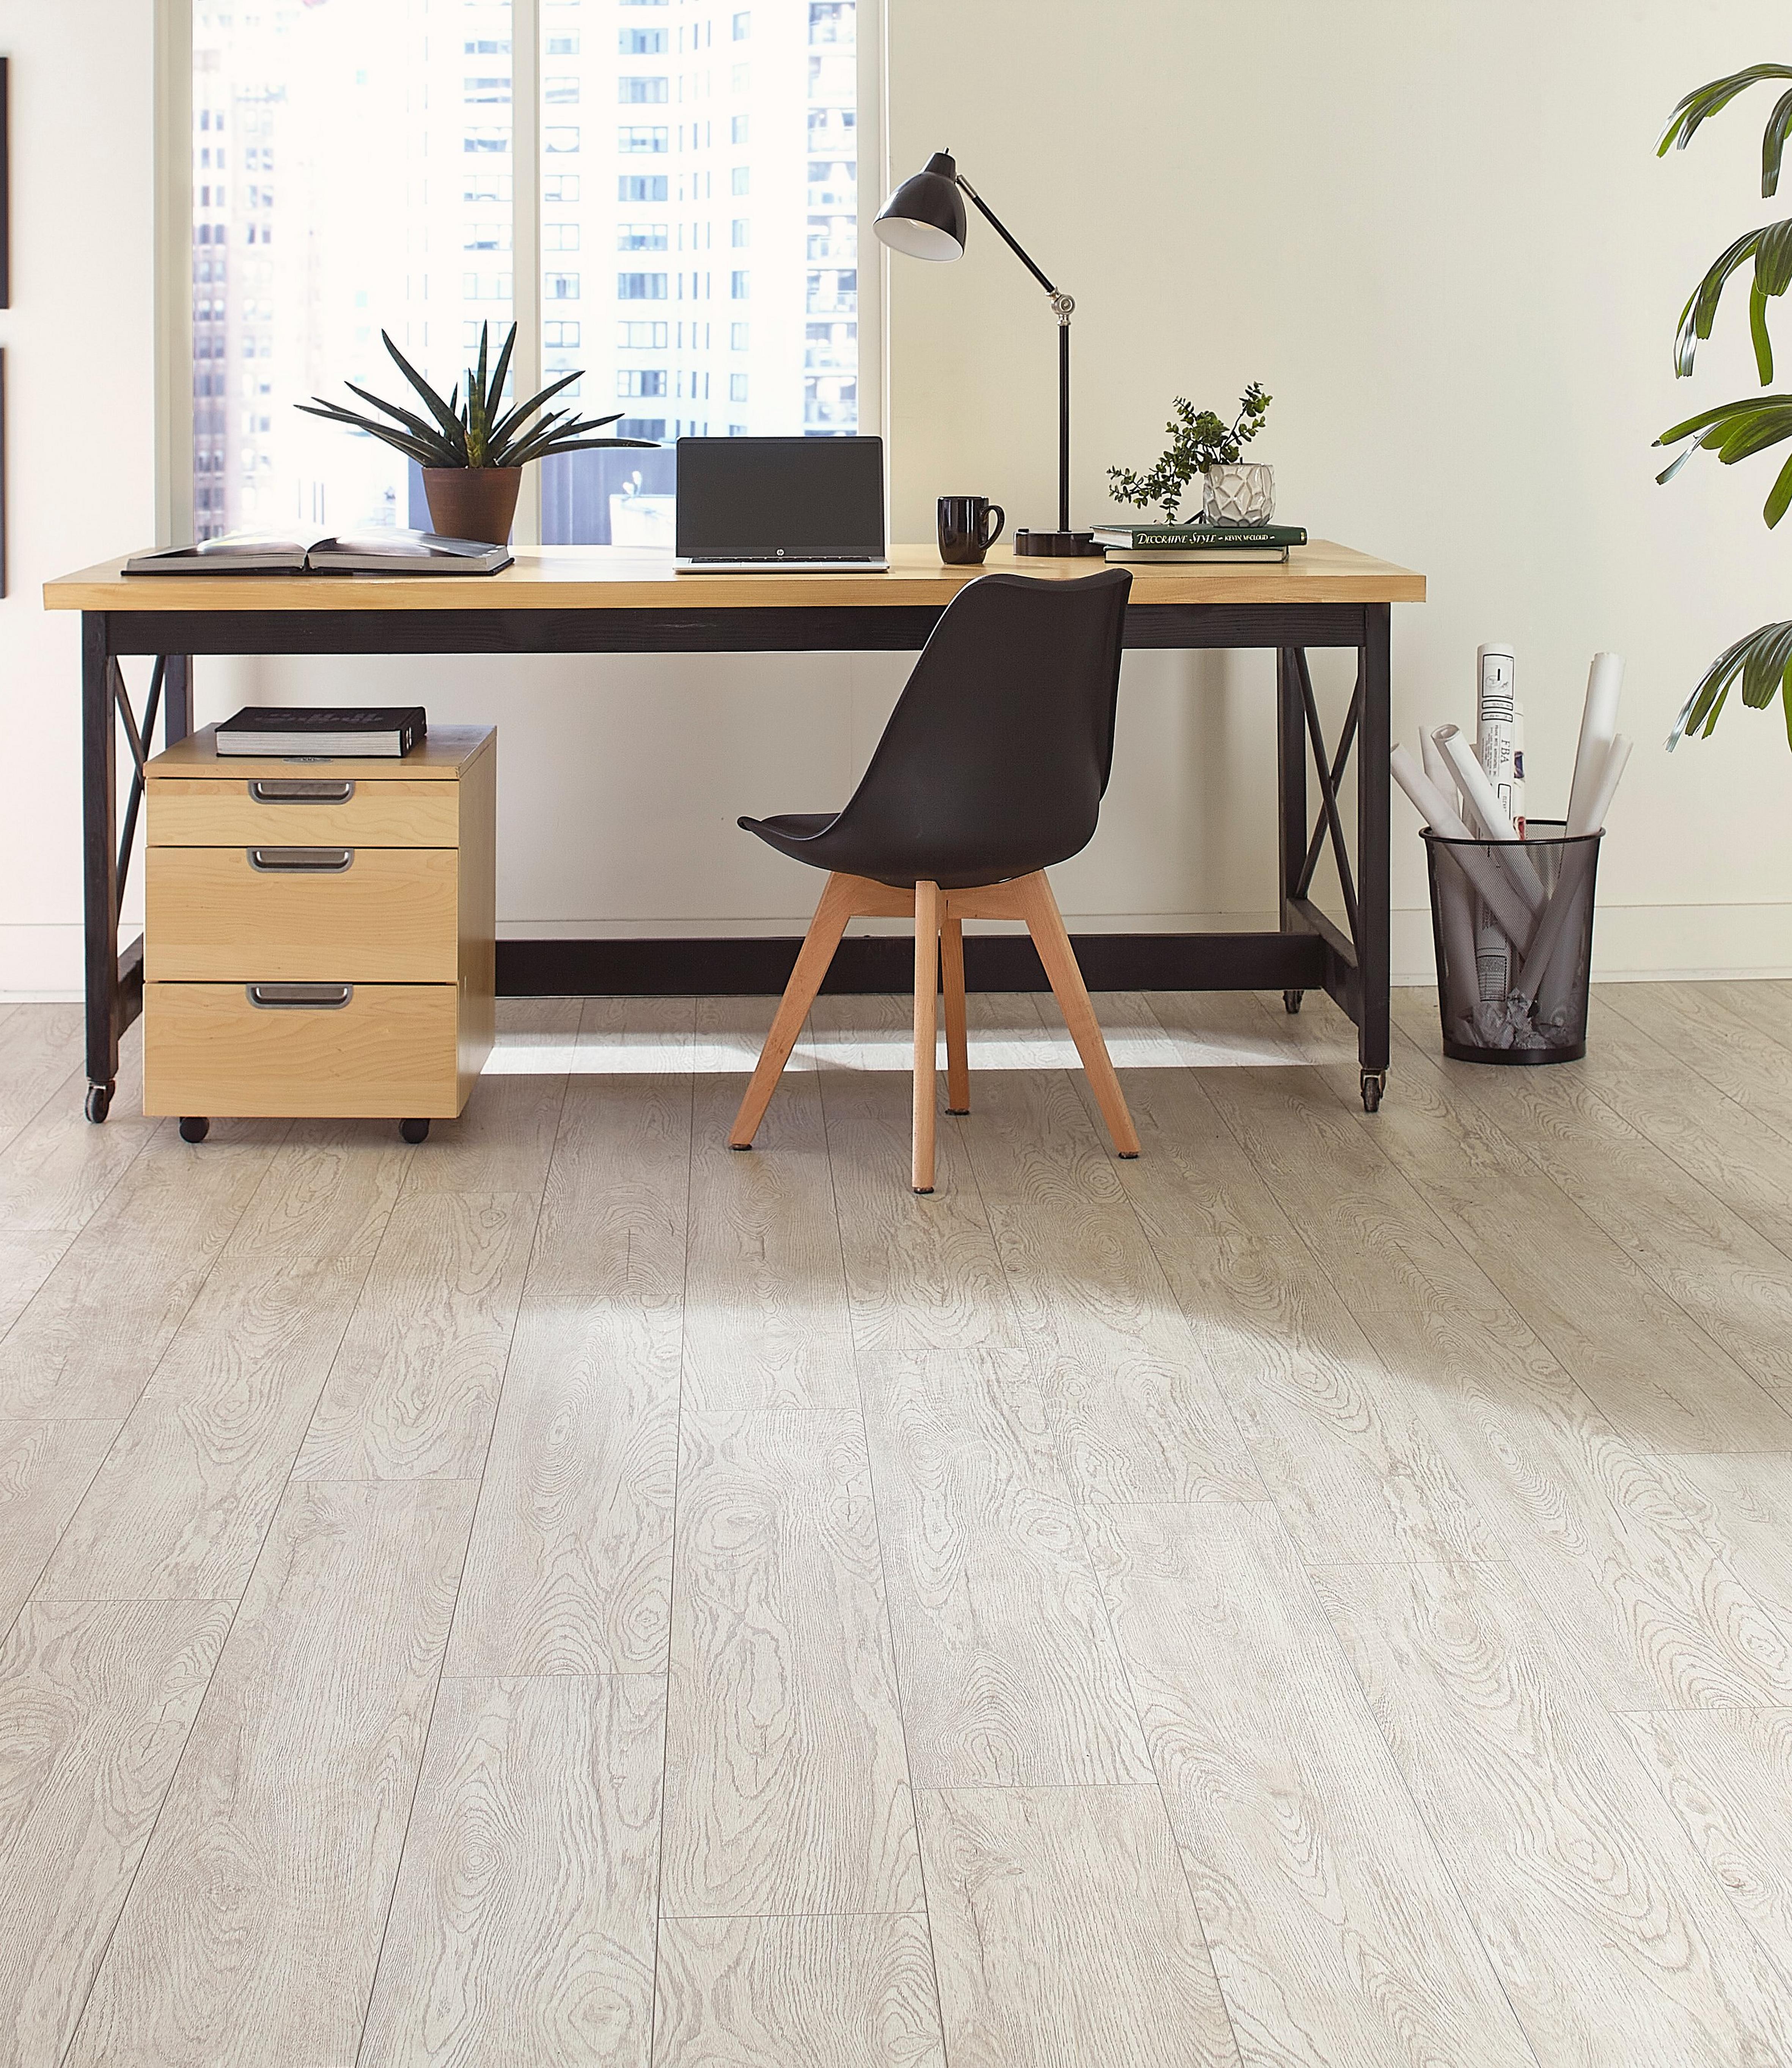 Office with OptiMax Eco-Resilient flooring with Techtanium Plus protection.